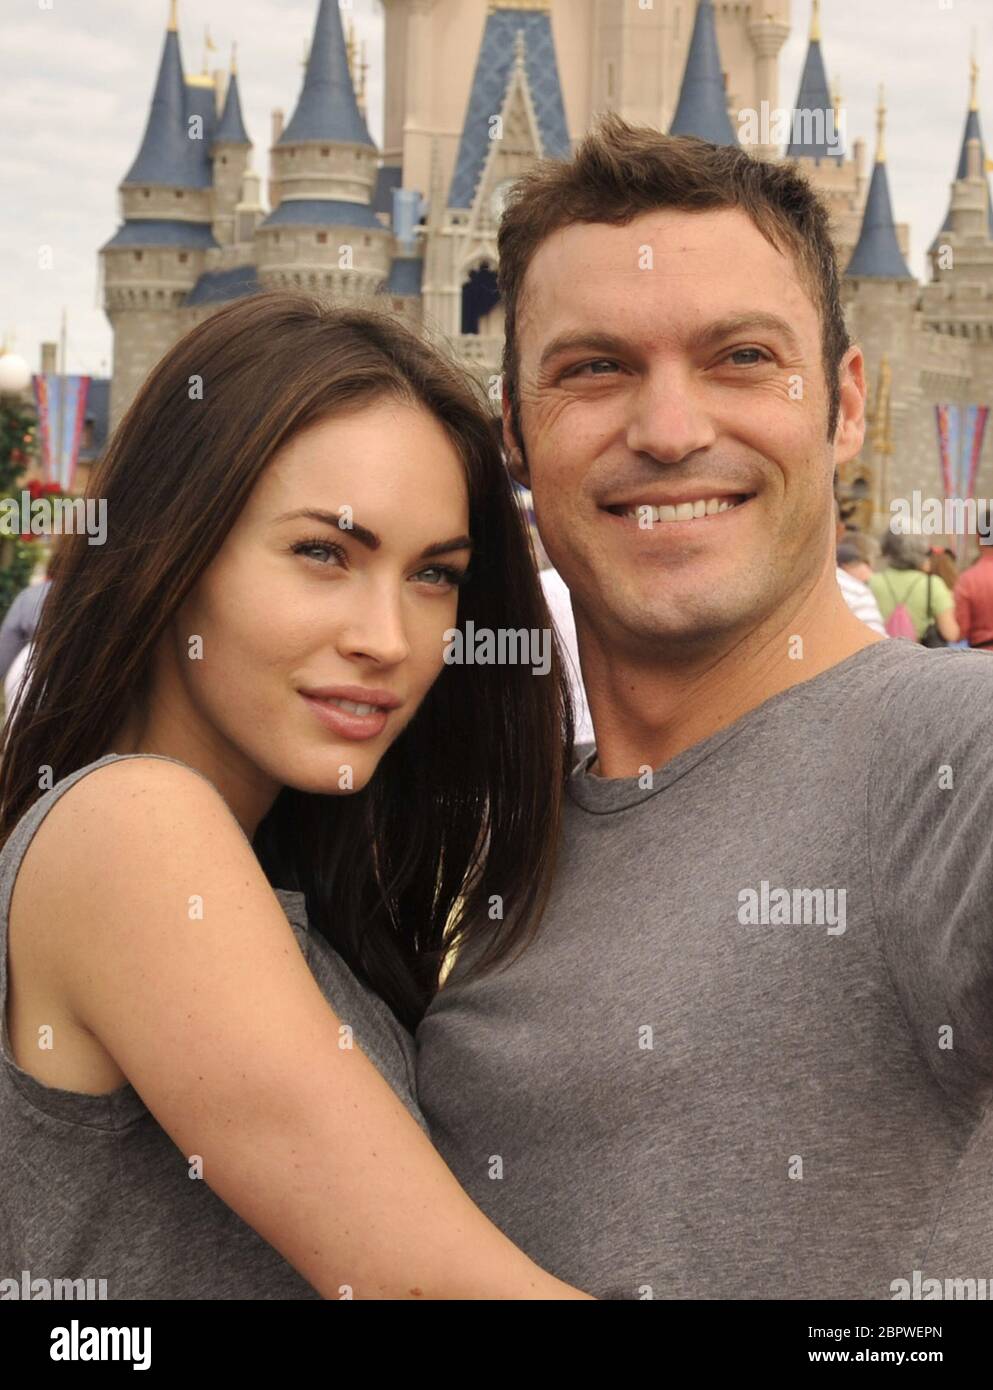 (Nov. 26, 2010): Actor Brian Austin Green (right) and his wife, actress/model Megan Fox (left), take a souvenir photo Nov. 26, 2010 in the Magic Kingdom in Lake Buena Vista, Fla. Green ('Beverly Hills, 90210', 'Desperate Housewives') and Fox ('Transformers,' 'Transformers: Revenge of the Fallen') were married in June 2010 in Hawaii. People: Megan Fox Brian Austin Green Credit: Storms Media Group/Alamy Live News Stock Photo